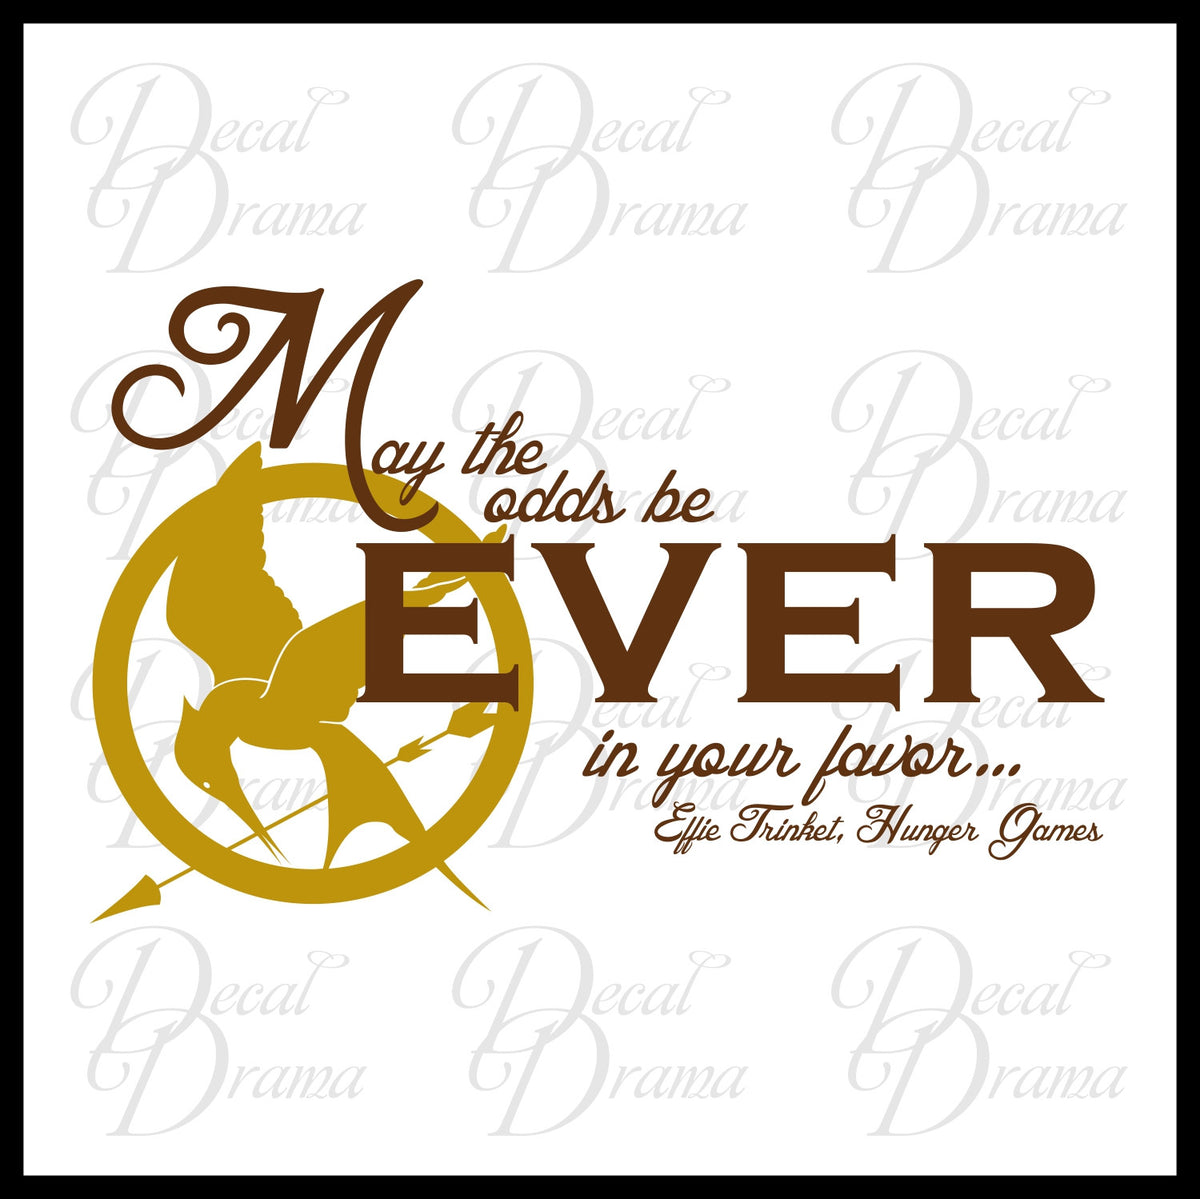 hunger games may the odds be ever in your favor quote